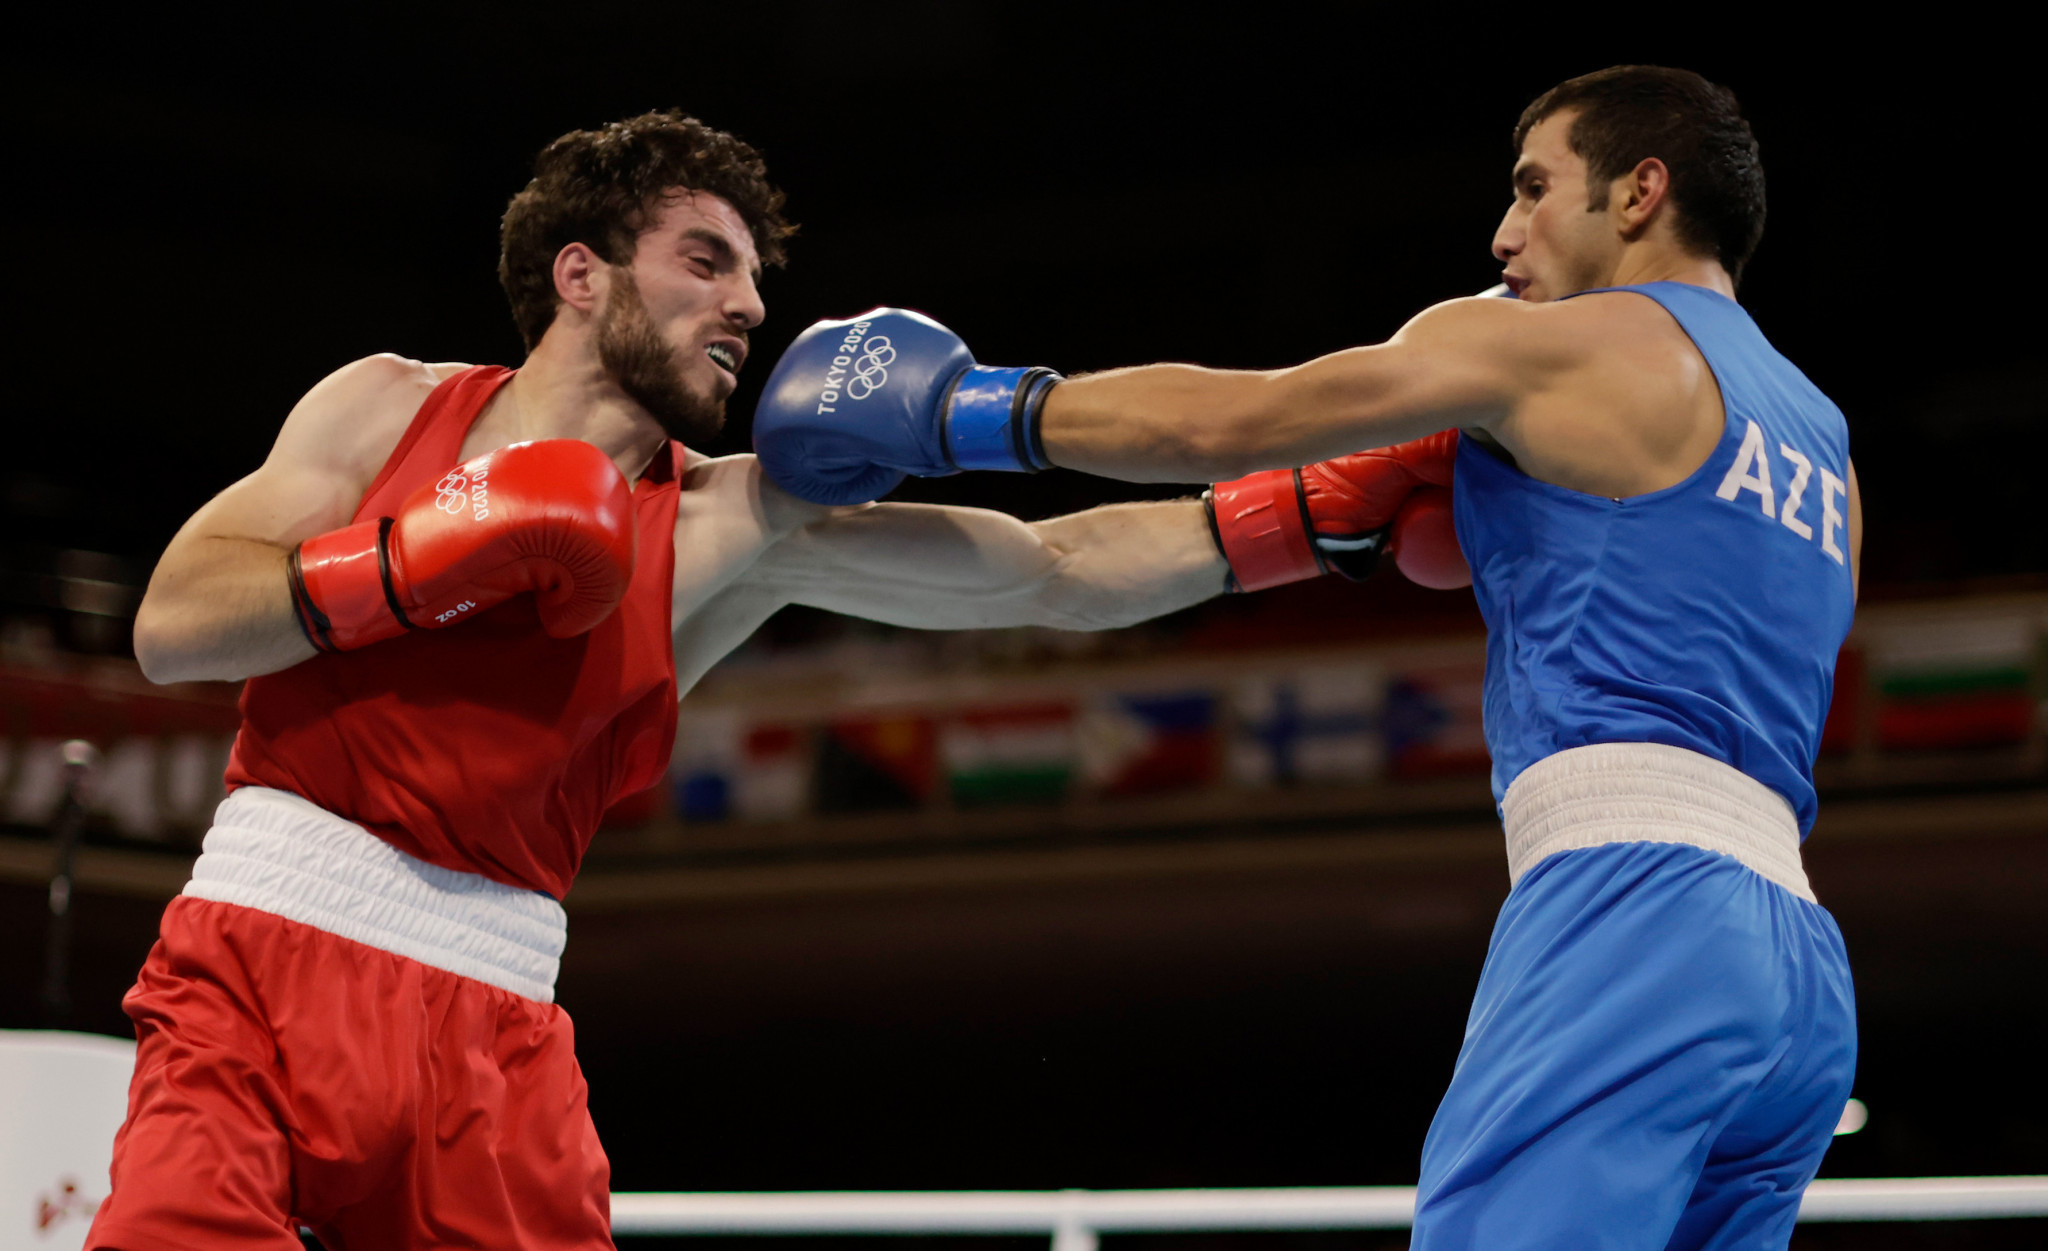 Azerbaijan will not compete at the European Championships in Armenia ©Getty Images